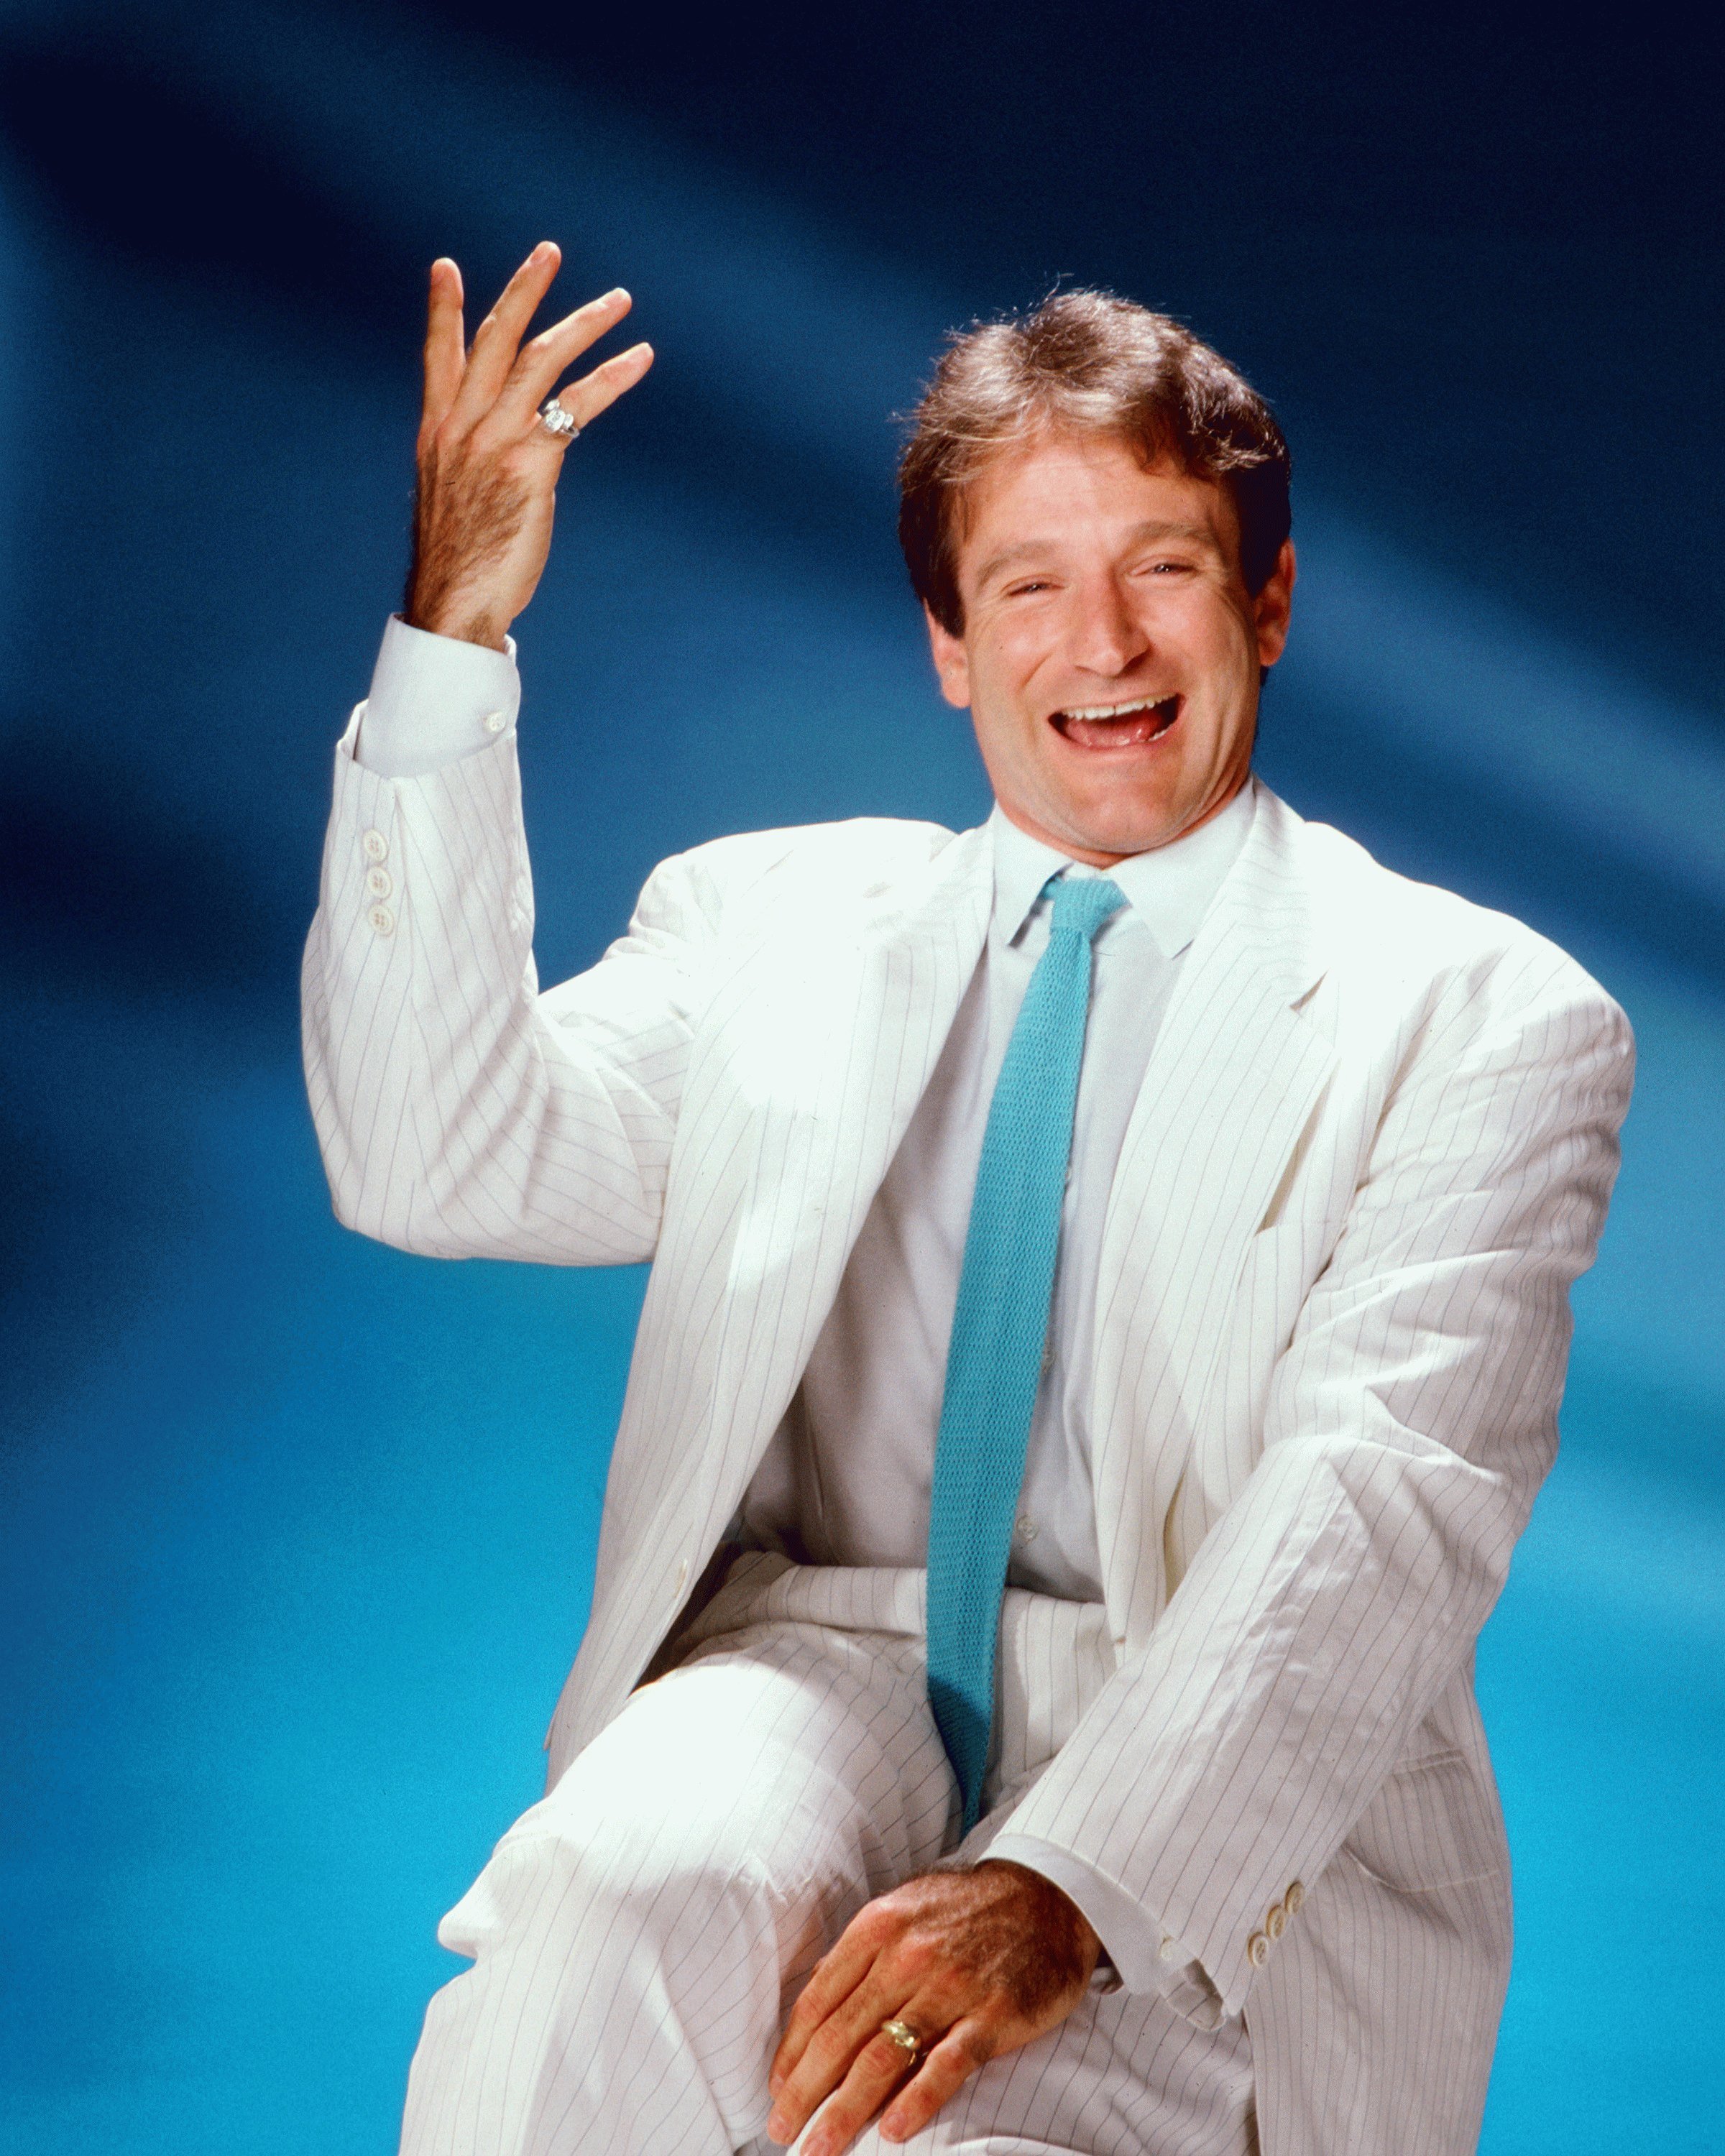 Actor and comedian Robin Williams poses for a portrait circa 1999 in Los Angeles, California.| Source: Getty Images